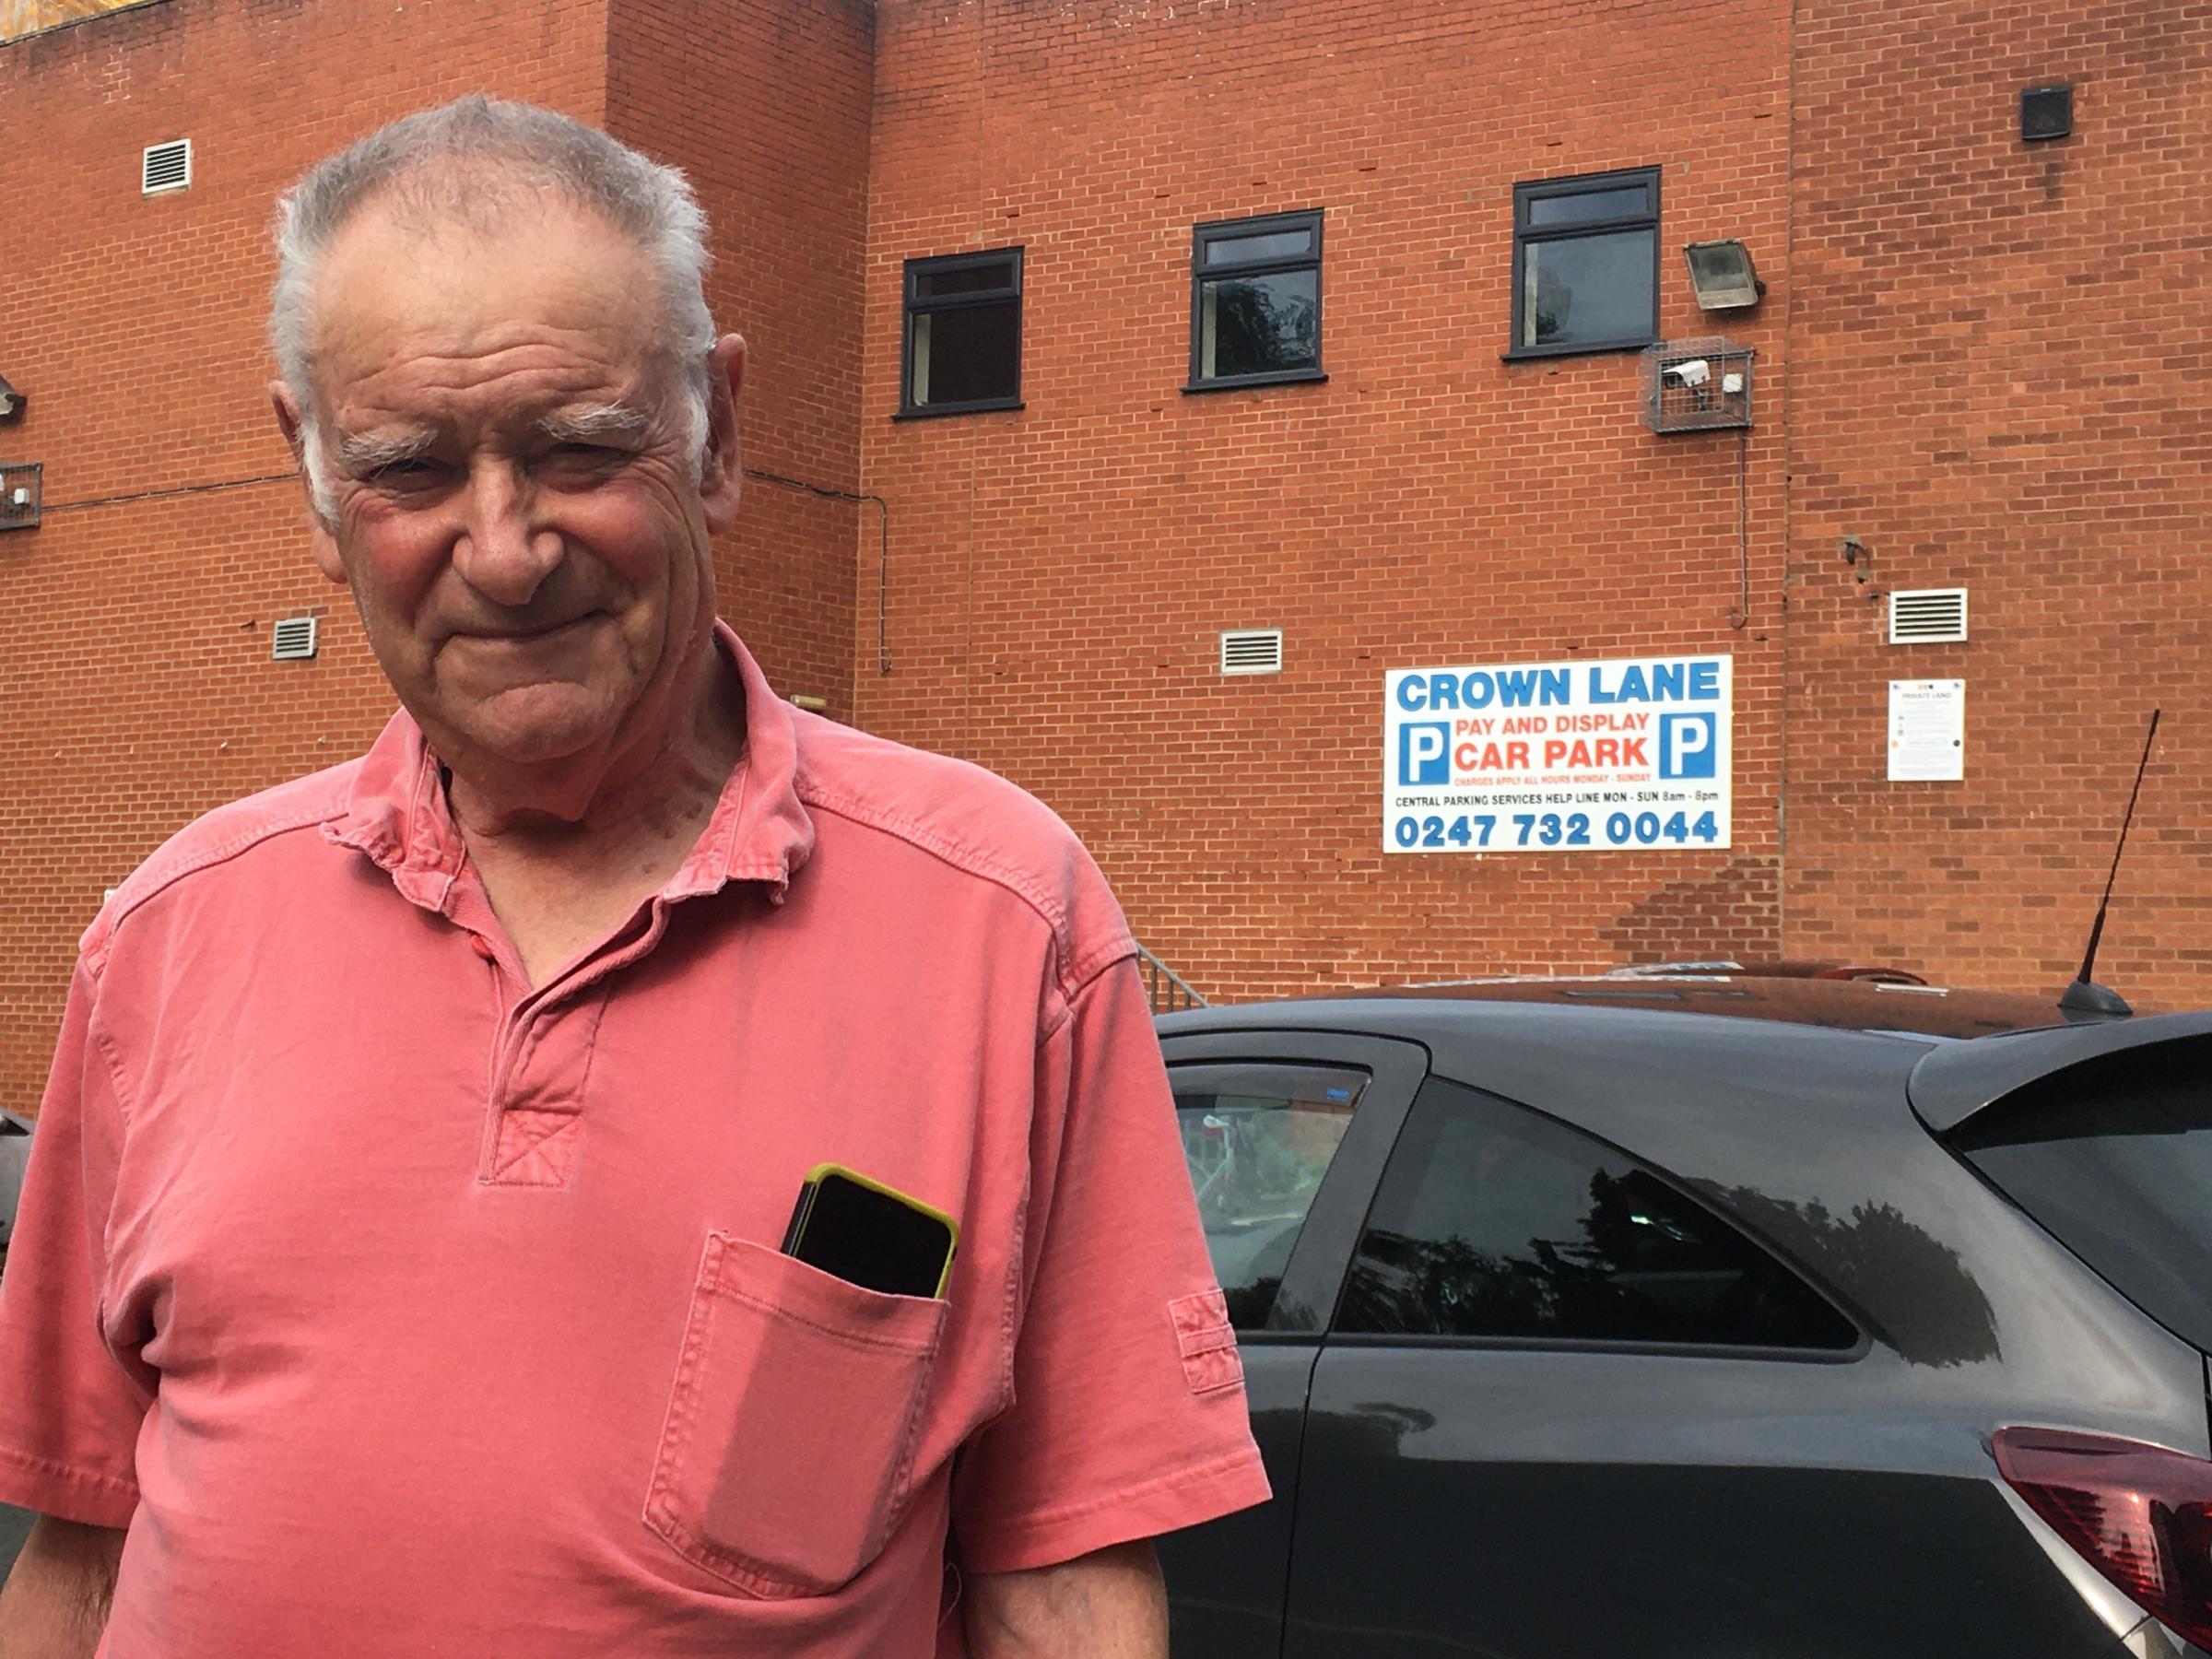 Clive Sowerby in front of the Crown Lane car park